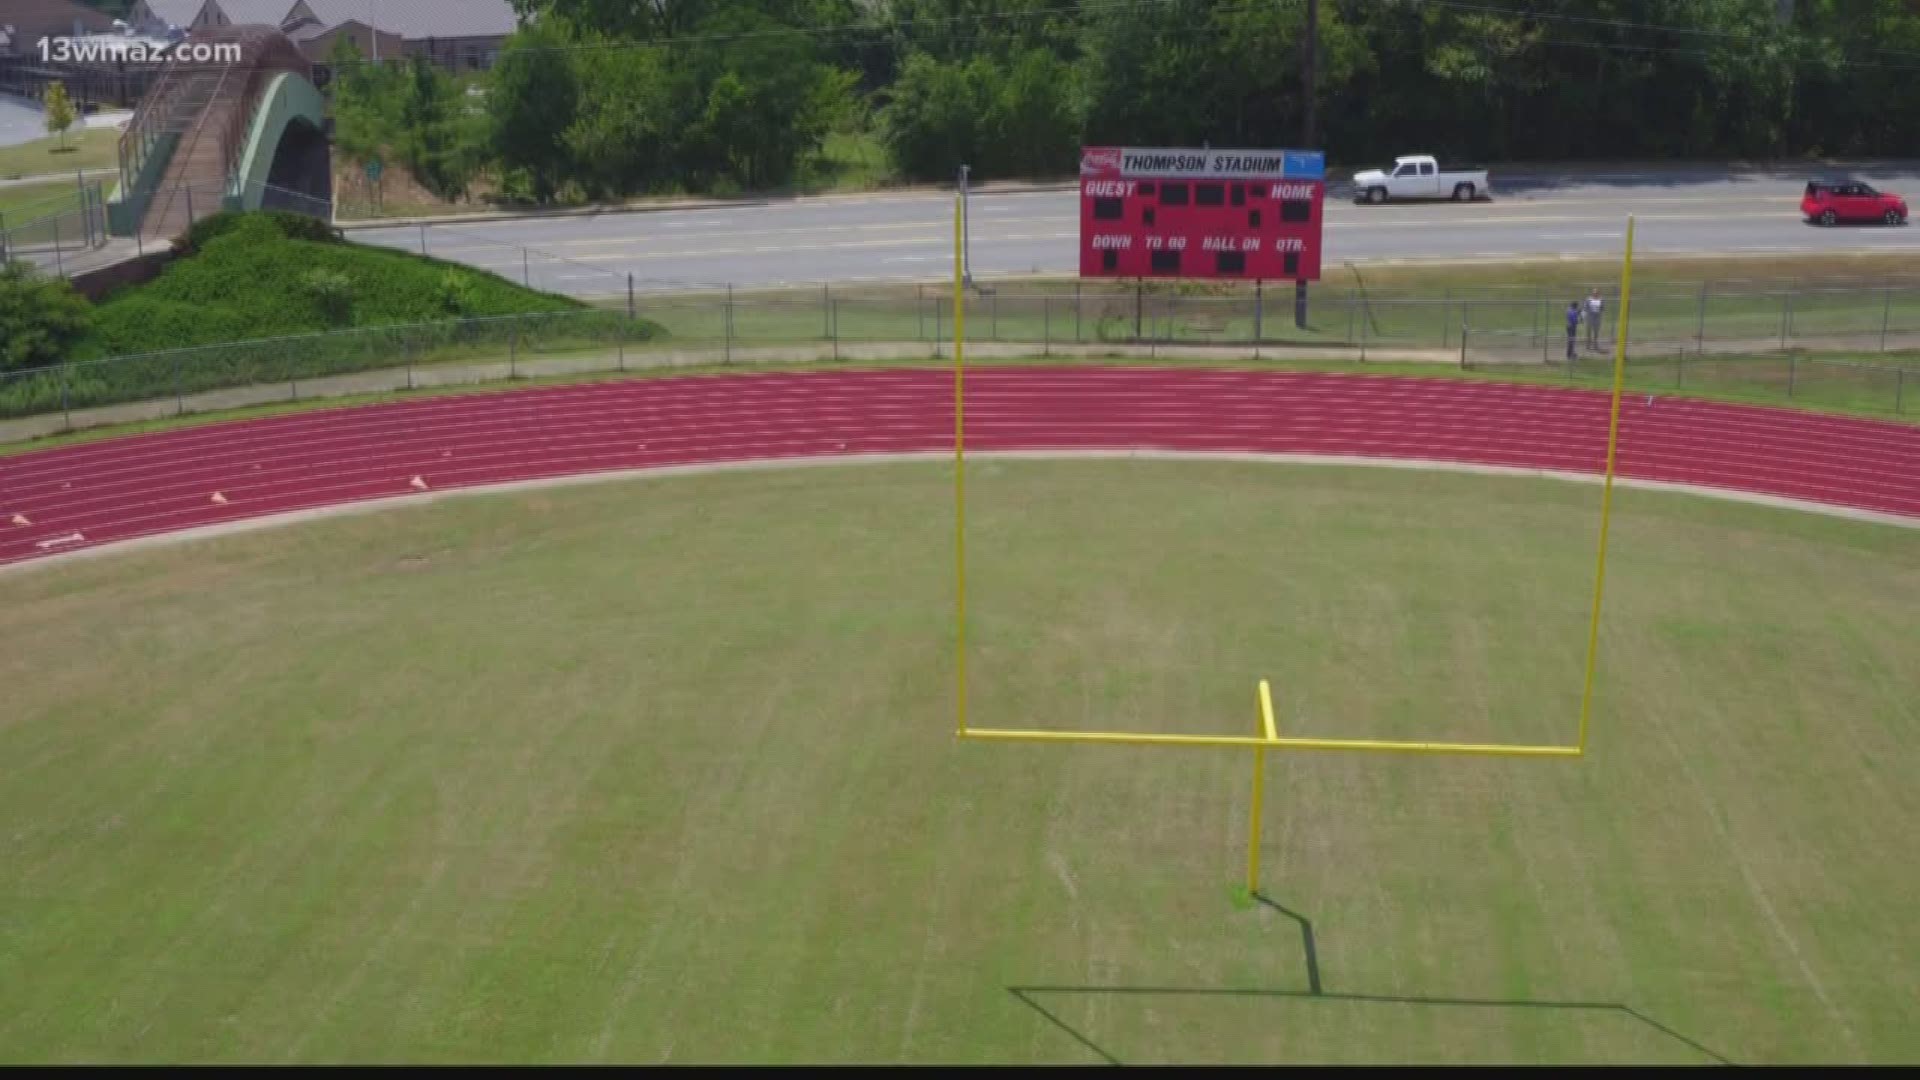 We're just two days away from high school football, and behind the scenes, school officials are working hard to keep athletes and fans safe inside stadiums. Chelsea Beimfohr asked Bibb County Schools what plans it has in place if there's an emergency.